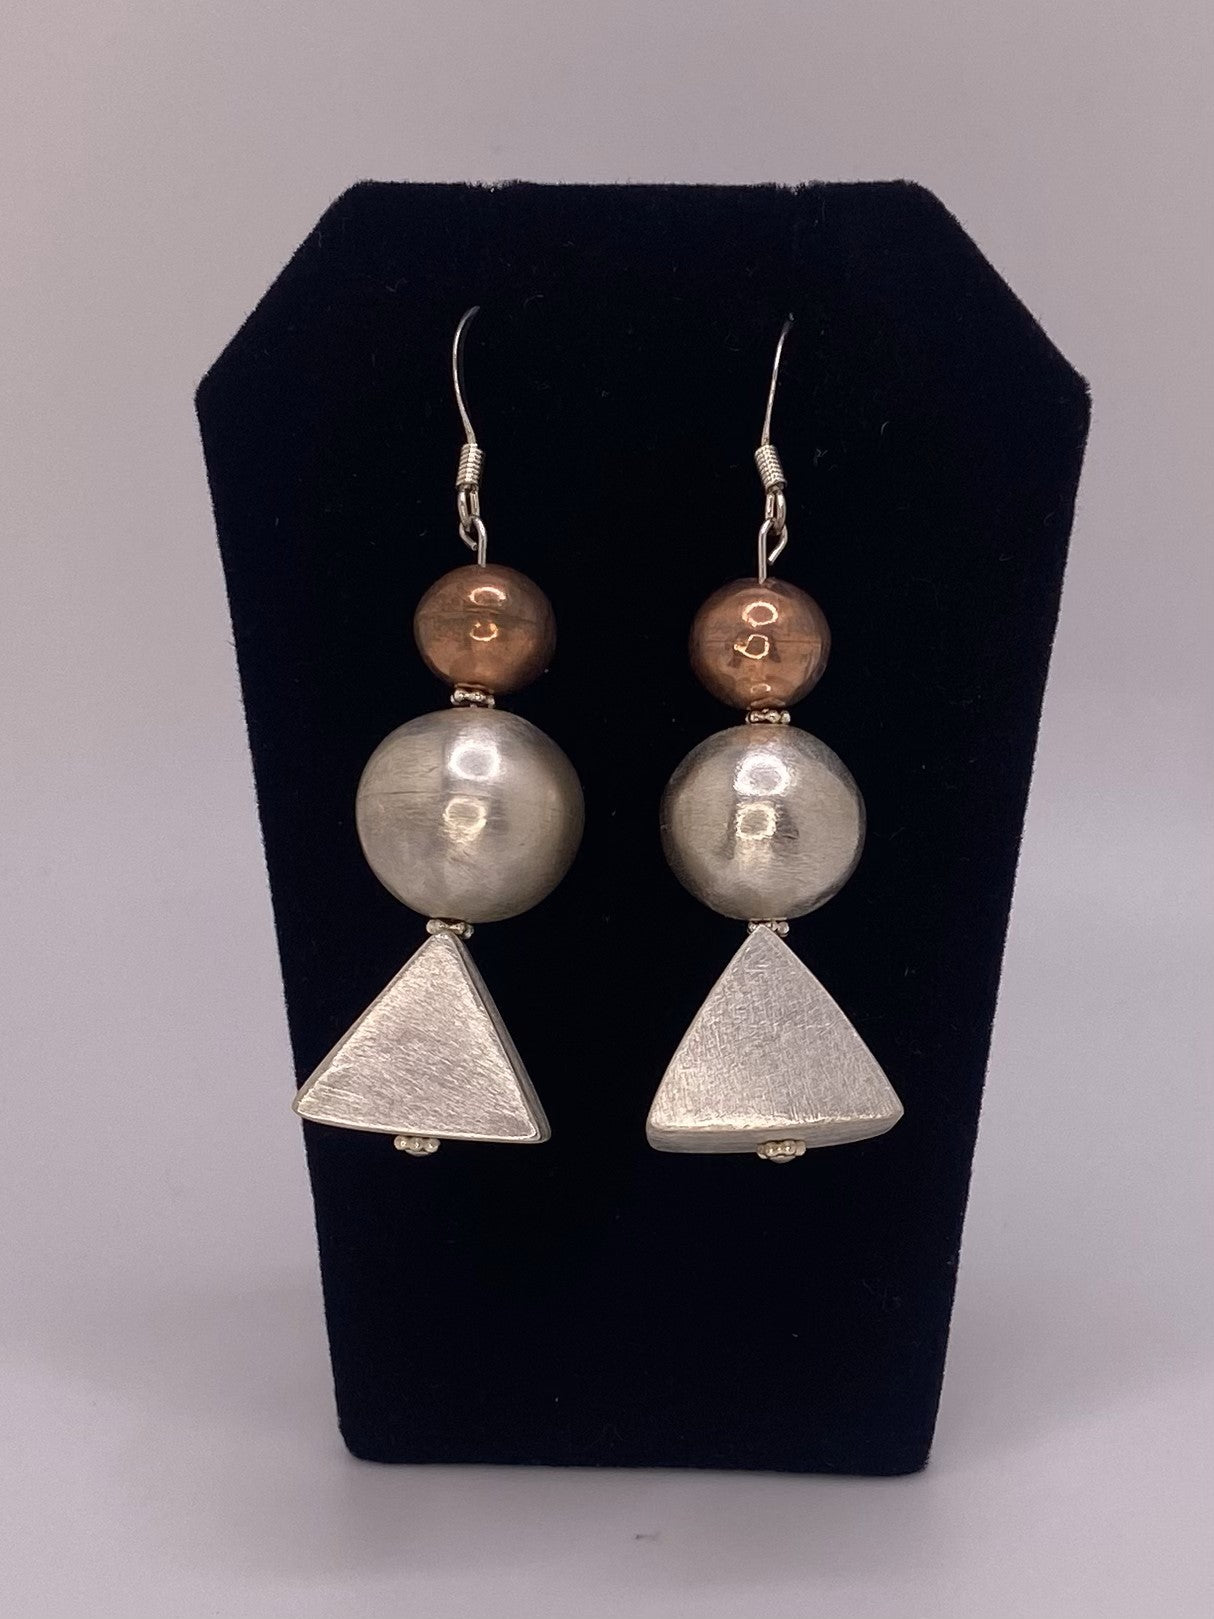 Sterling Silver Earrings with Handmade Triangular & Round Silver Hollow Form Beads & Round Copper Bead